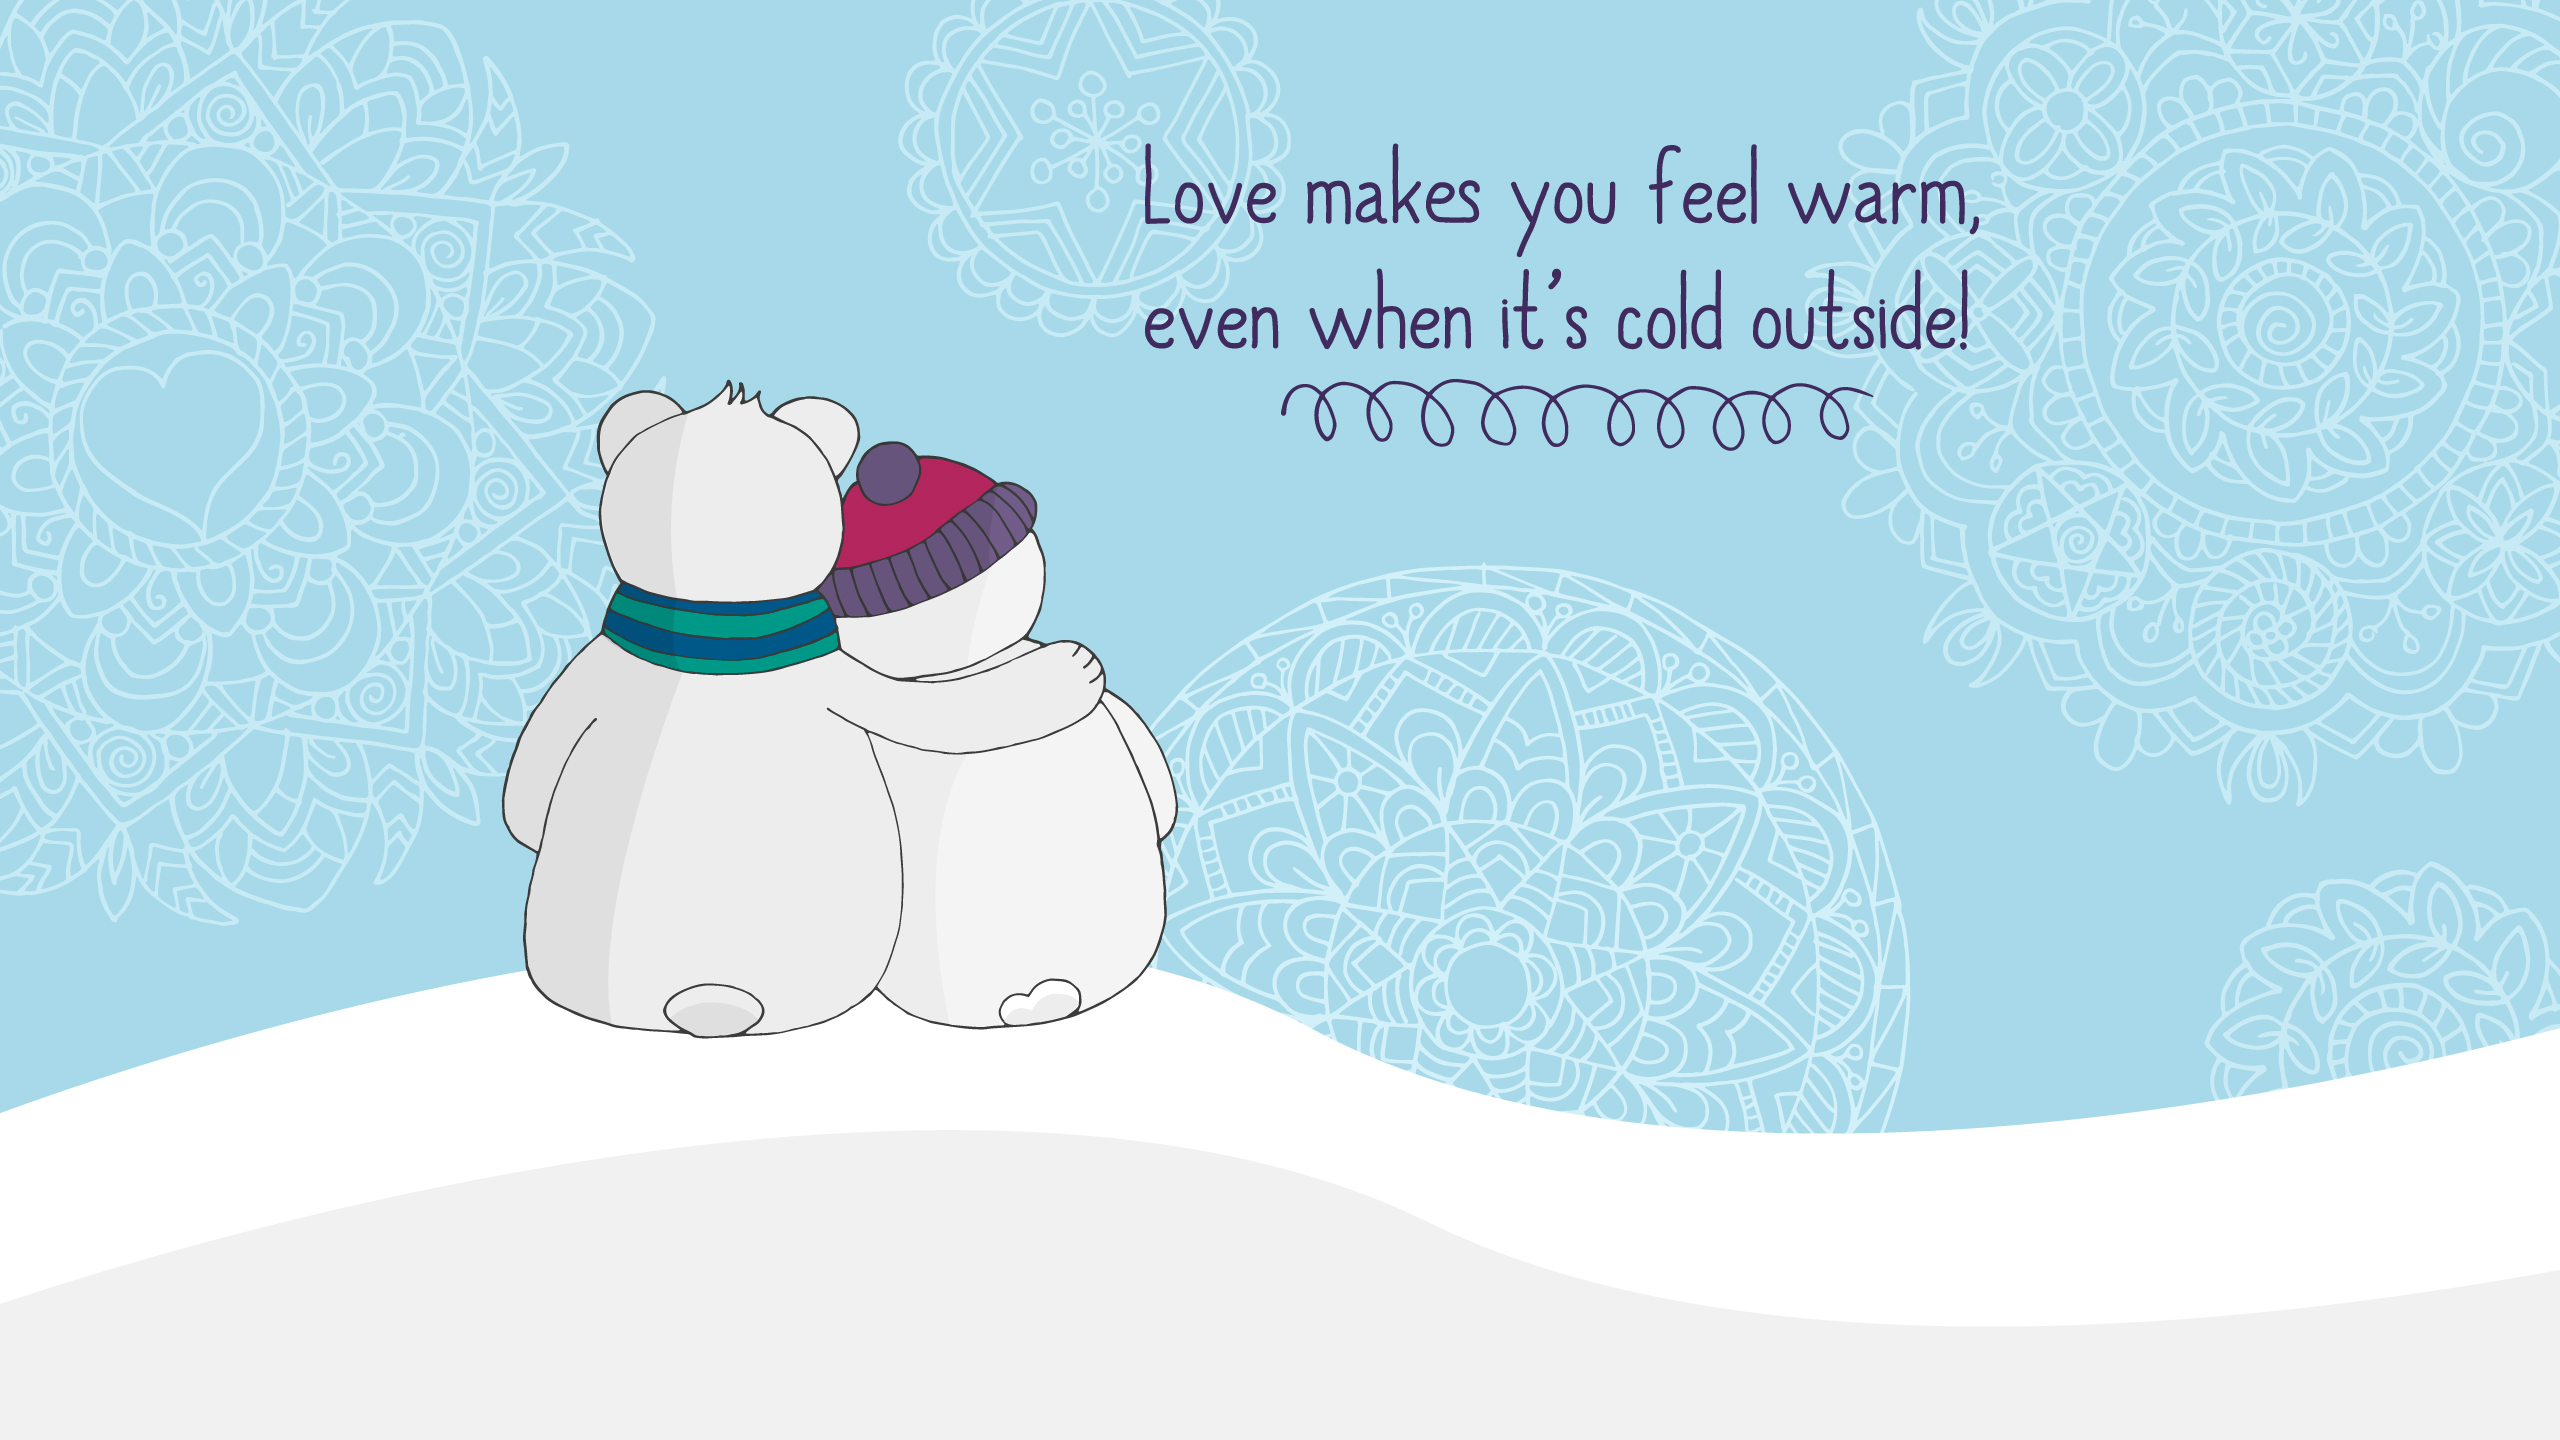 Love makes you warm